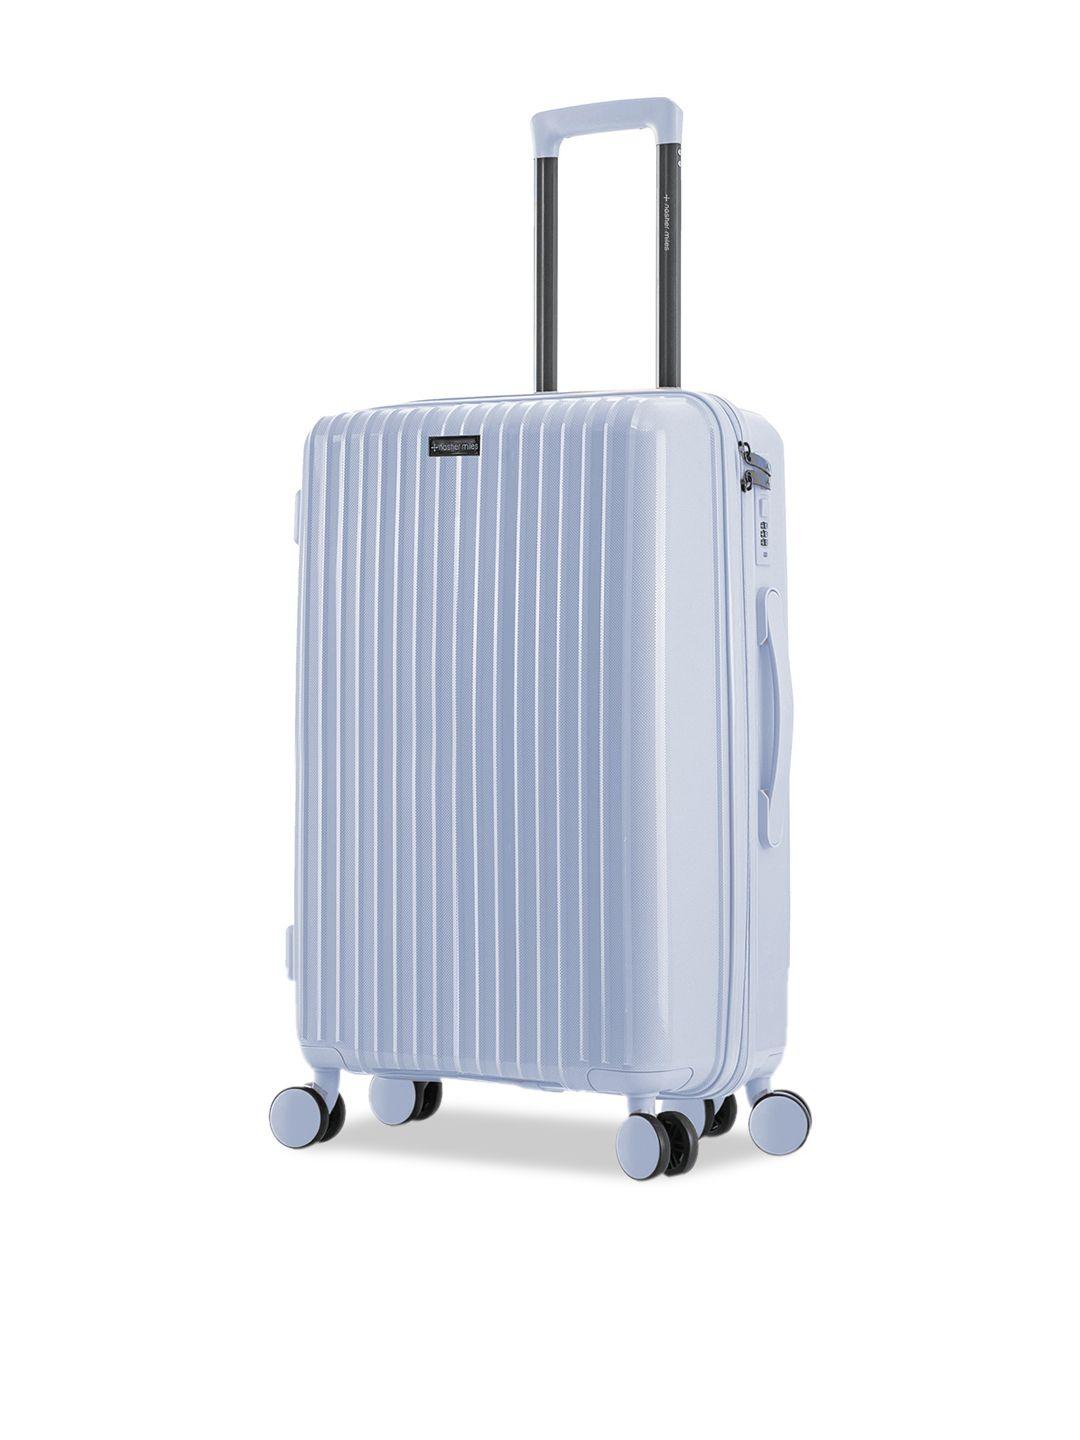 nasher miles auroville textured hard trolley suitcases - 65 cm